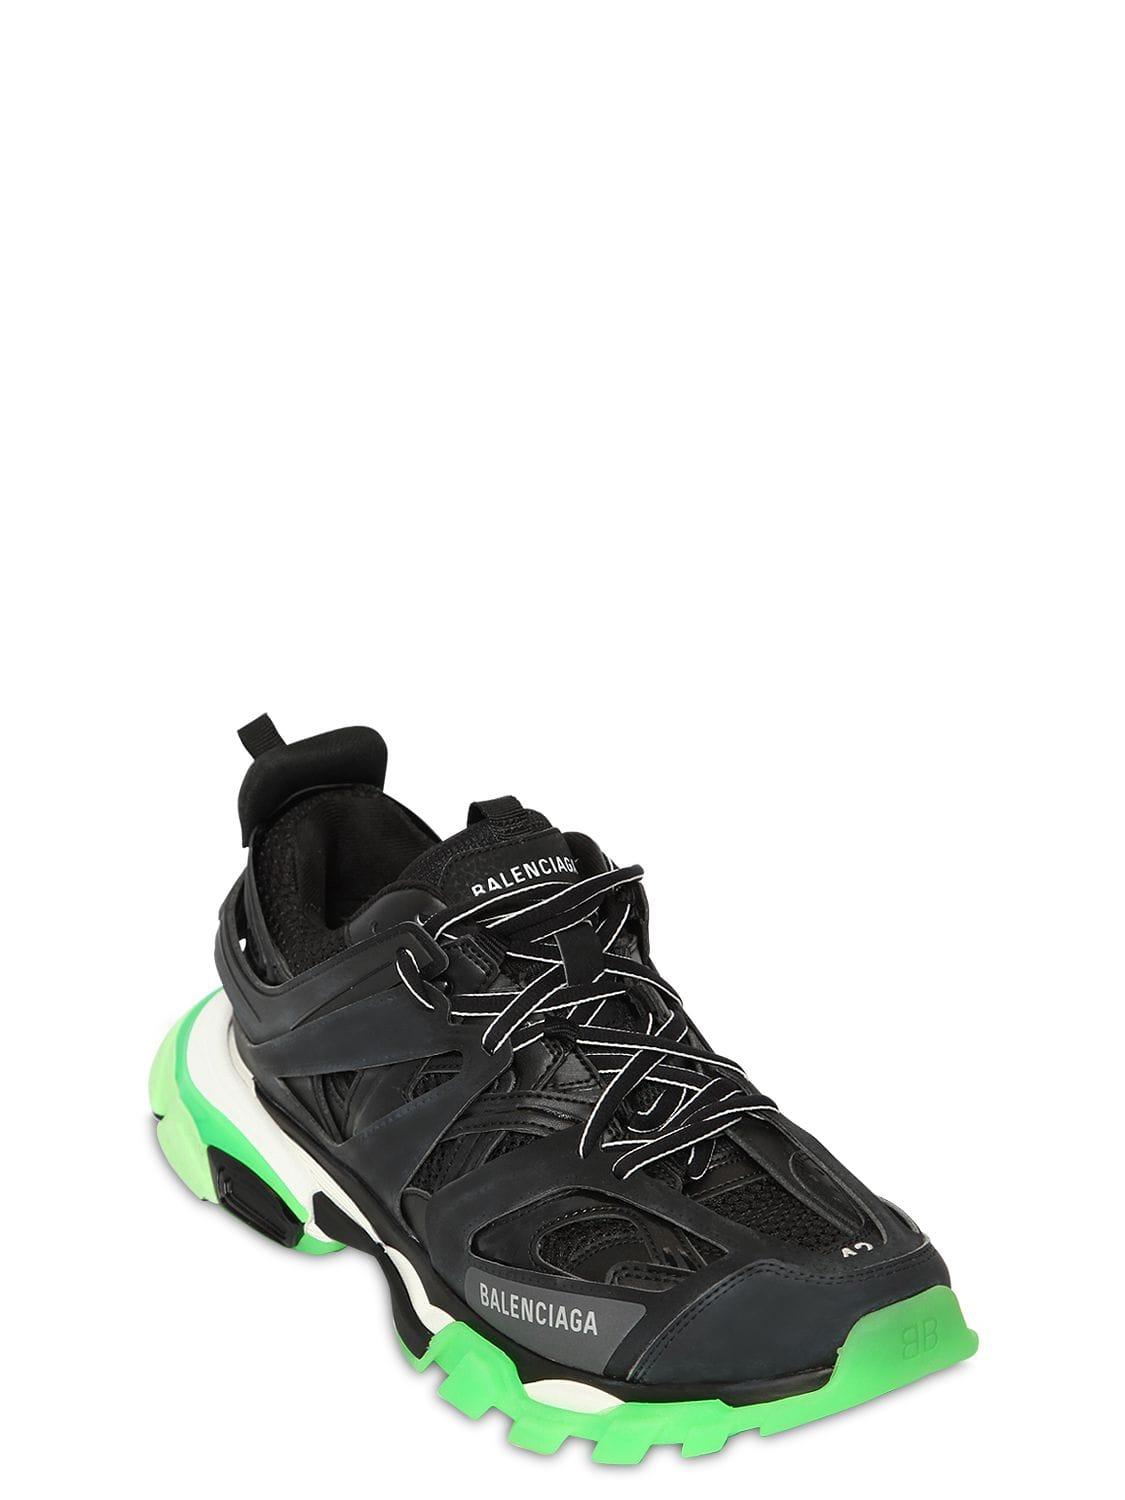 Balenciaga Rubber Track 2.0 Trainers in Black for Men Lyst